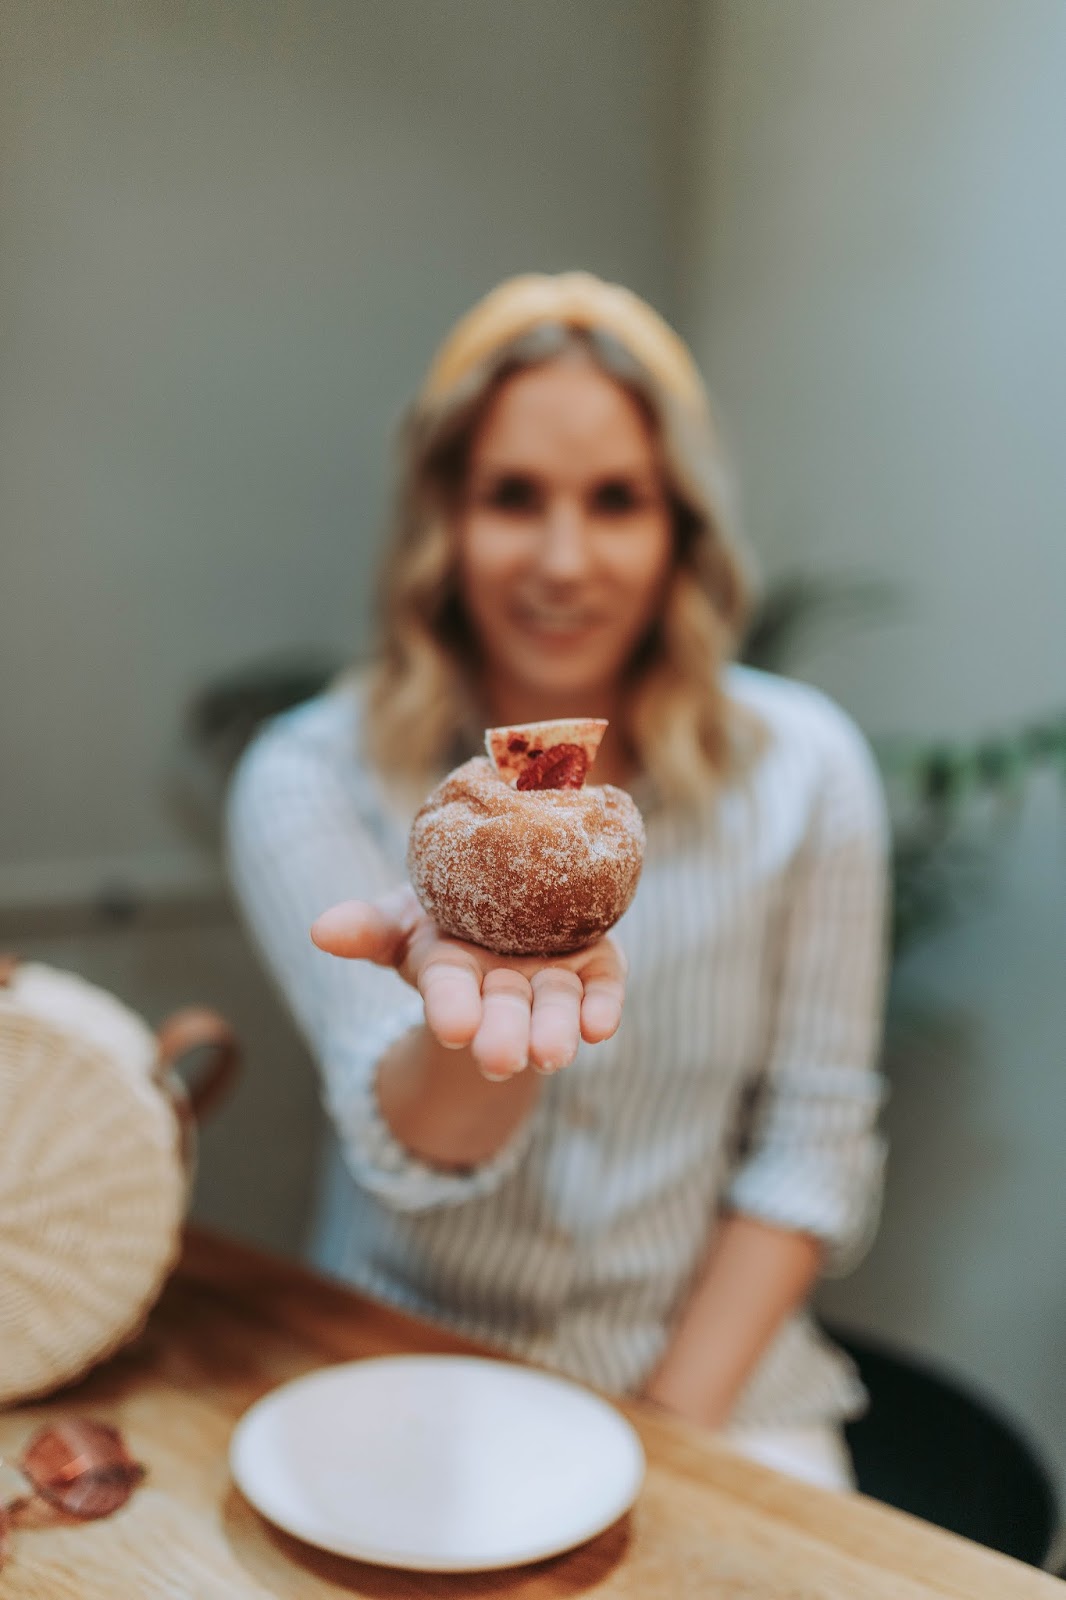 Wellbeing | Why I'm Done With Fad Diets and False Claims - Rachel Emily Blog